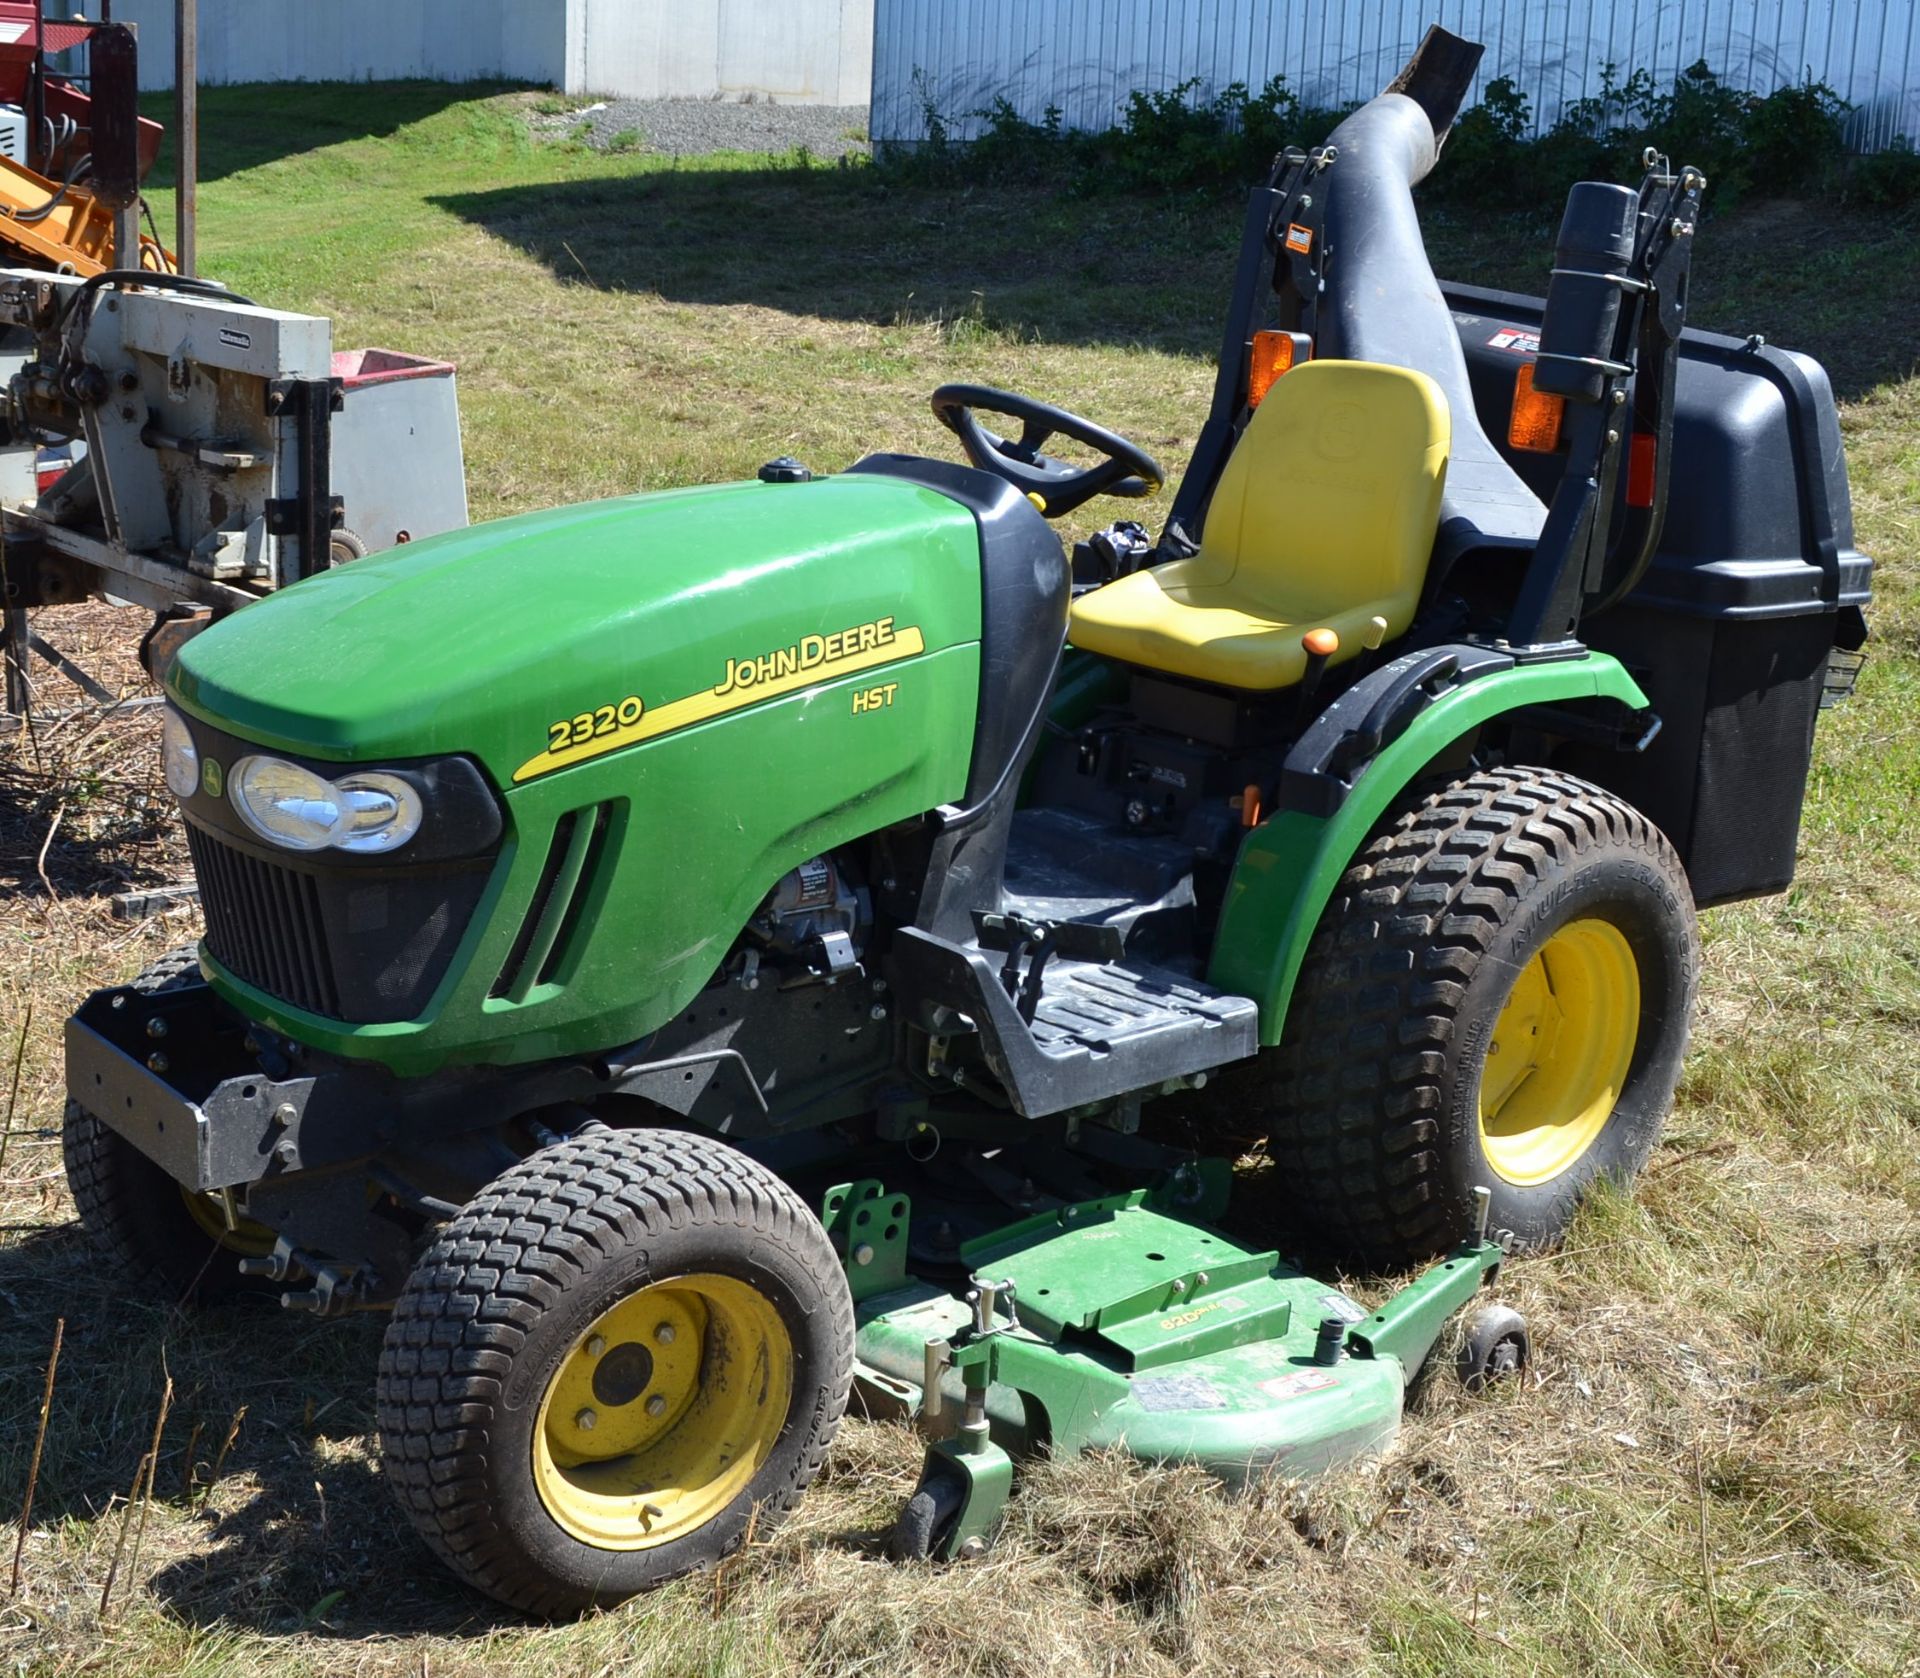 JOHN DEERE 2320 LAWN TRACTOR WITH BAGGER S/N: LV2320H502375